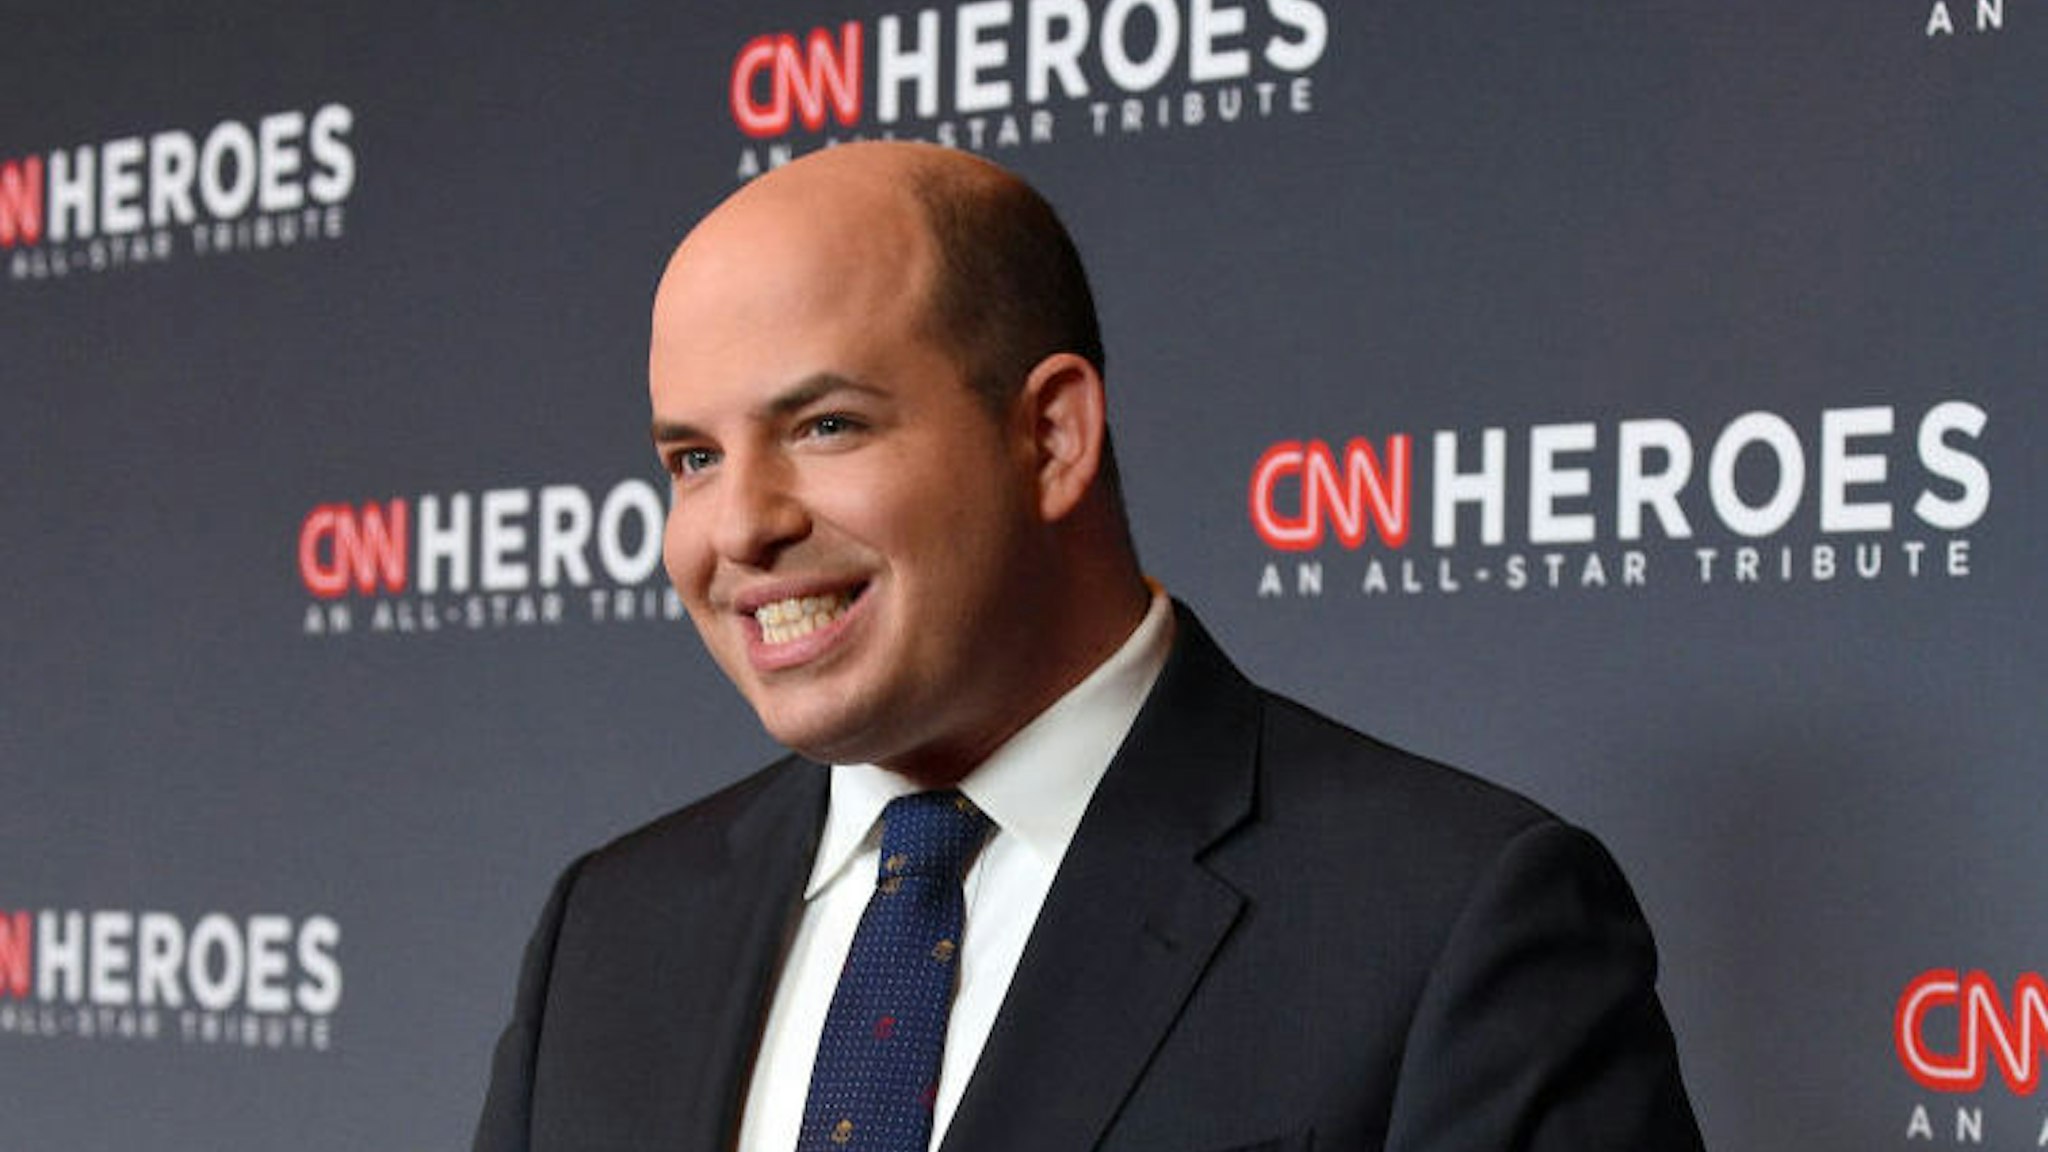 Brian Stelter attends CNN Heroes at the American Museum of Natural History on December 08, 2019 in New York City. (Photo by Kevin Mazur/Getty Images for WarnerMedia)